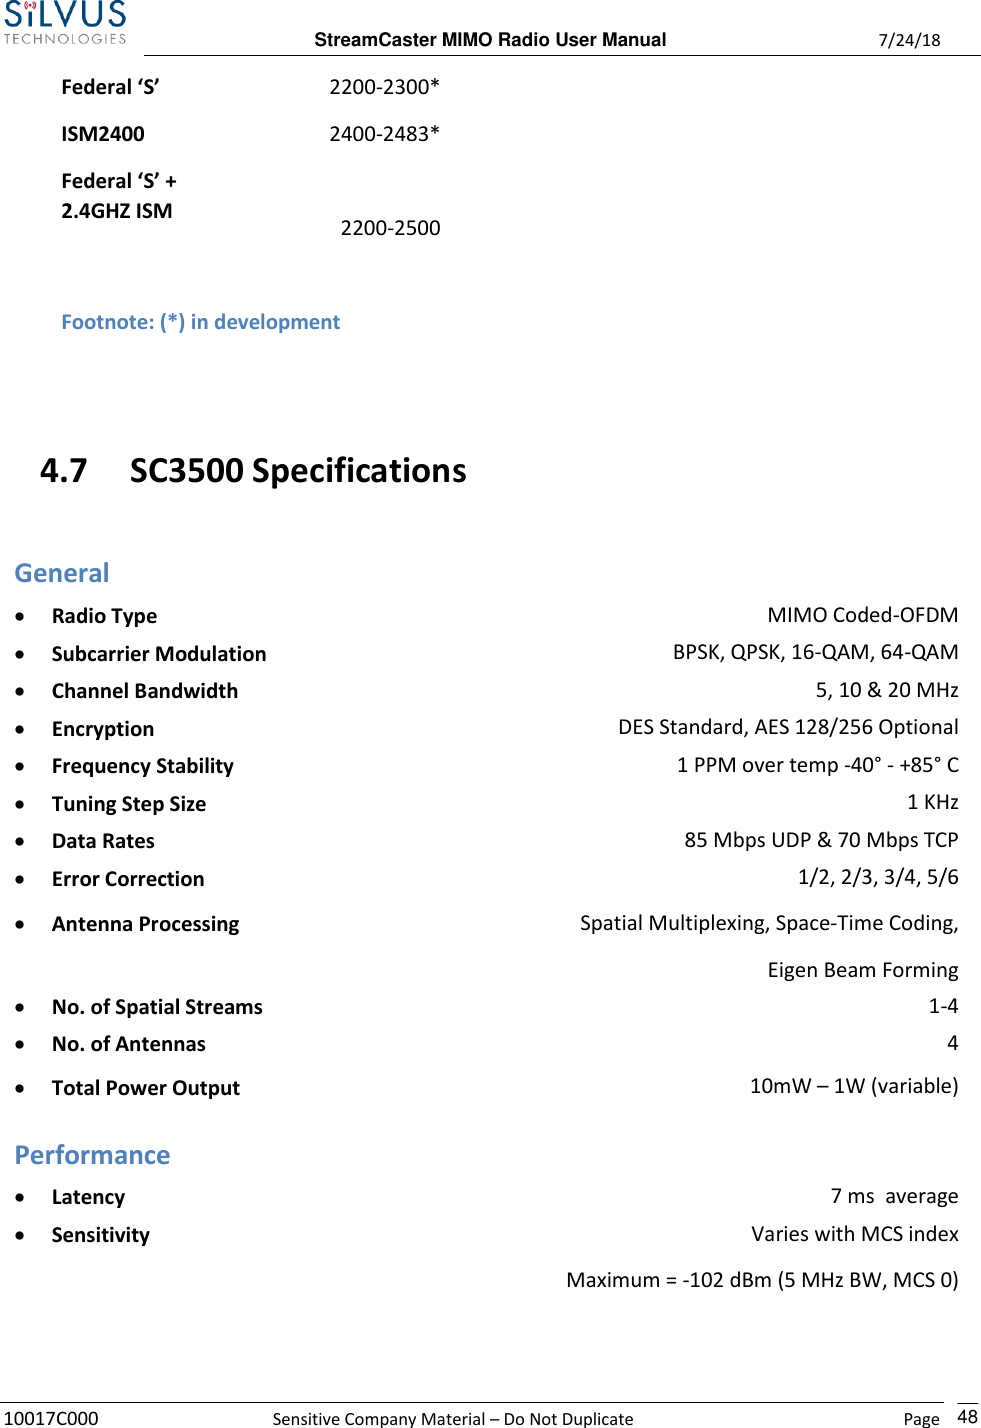  StreamCaster MIMO Radio User Manual  7/24/18 10017C000  Sensitive Company Material – Do Not Duplicate    Page    48  Federal ‘S’ 2200-2300*     ISM2400 Federal ‘S’ + 2.4GHZ ISM 2400-2483*   2200-2500           Footnote: (*) in development     4.7 SC3500 Specifications General • Radio Type MIMO Coded-OFDM • Subcarrier Modulation BPSK, QPSK, 16-QAM, 64-QAM • Channel Bandwidth 5, 10 &amp; 20 MHz • Encryption DES Standard, AES 128/256 Optional • Frequency Stability 1 PPM over temp -40° - +85° C • Tuning Step Size 1 KHz • Data Rates 85 Mbps UDP &amp; 70 Mbps TCP • Error Correction 1/2, 2/3, 3/4, 5/6 • Antenna Processing Spatial Multiplexing, Space-Time Coding, Eigen Beam Forming • No. of Spatial Streams 1-4 • No. of Antennas 4  • Total Power Output 10mW – 1W (variable)  Performance • Latency 7 ms  average • Sensitivity Varies with MCS index Maximum = -102 dBm (5 MHz BW, MCS 0)  